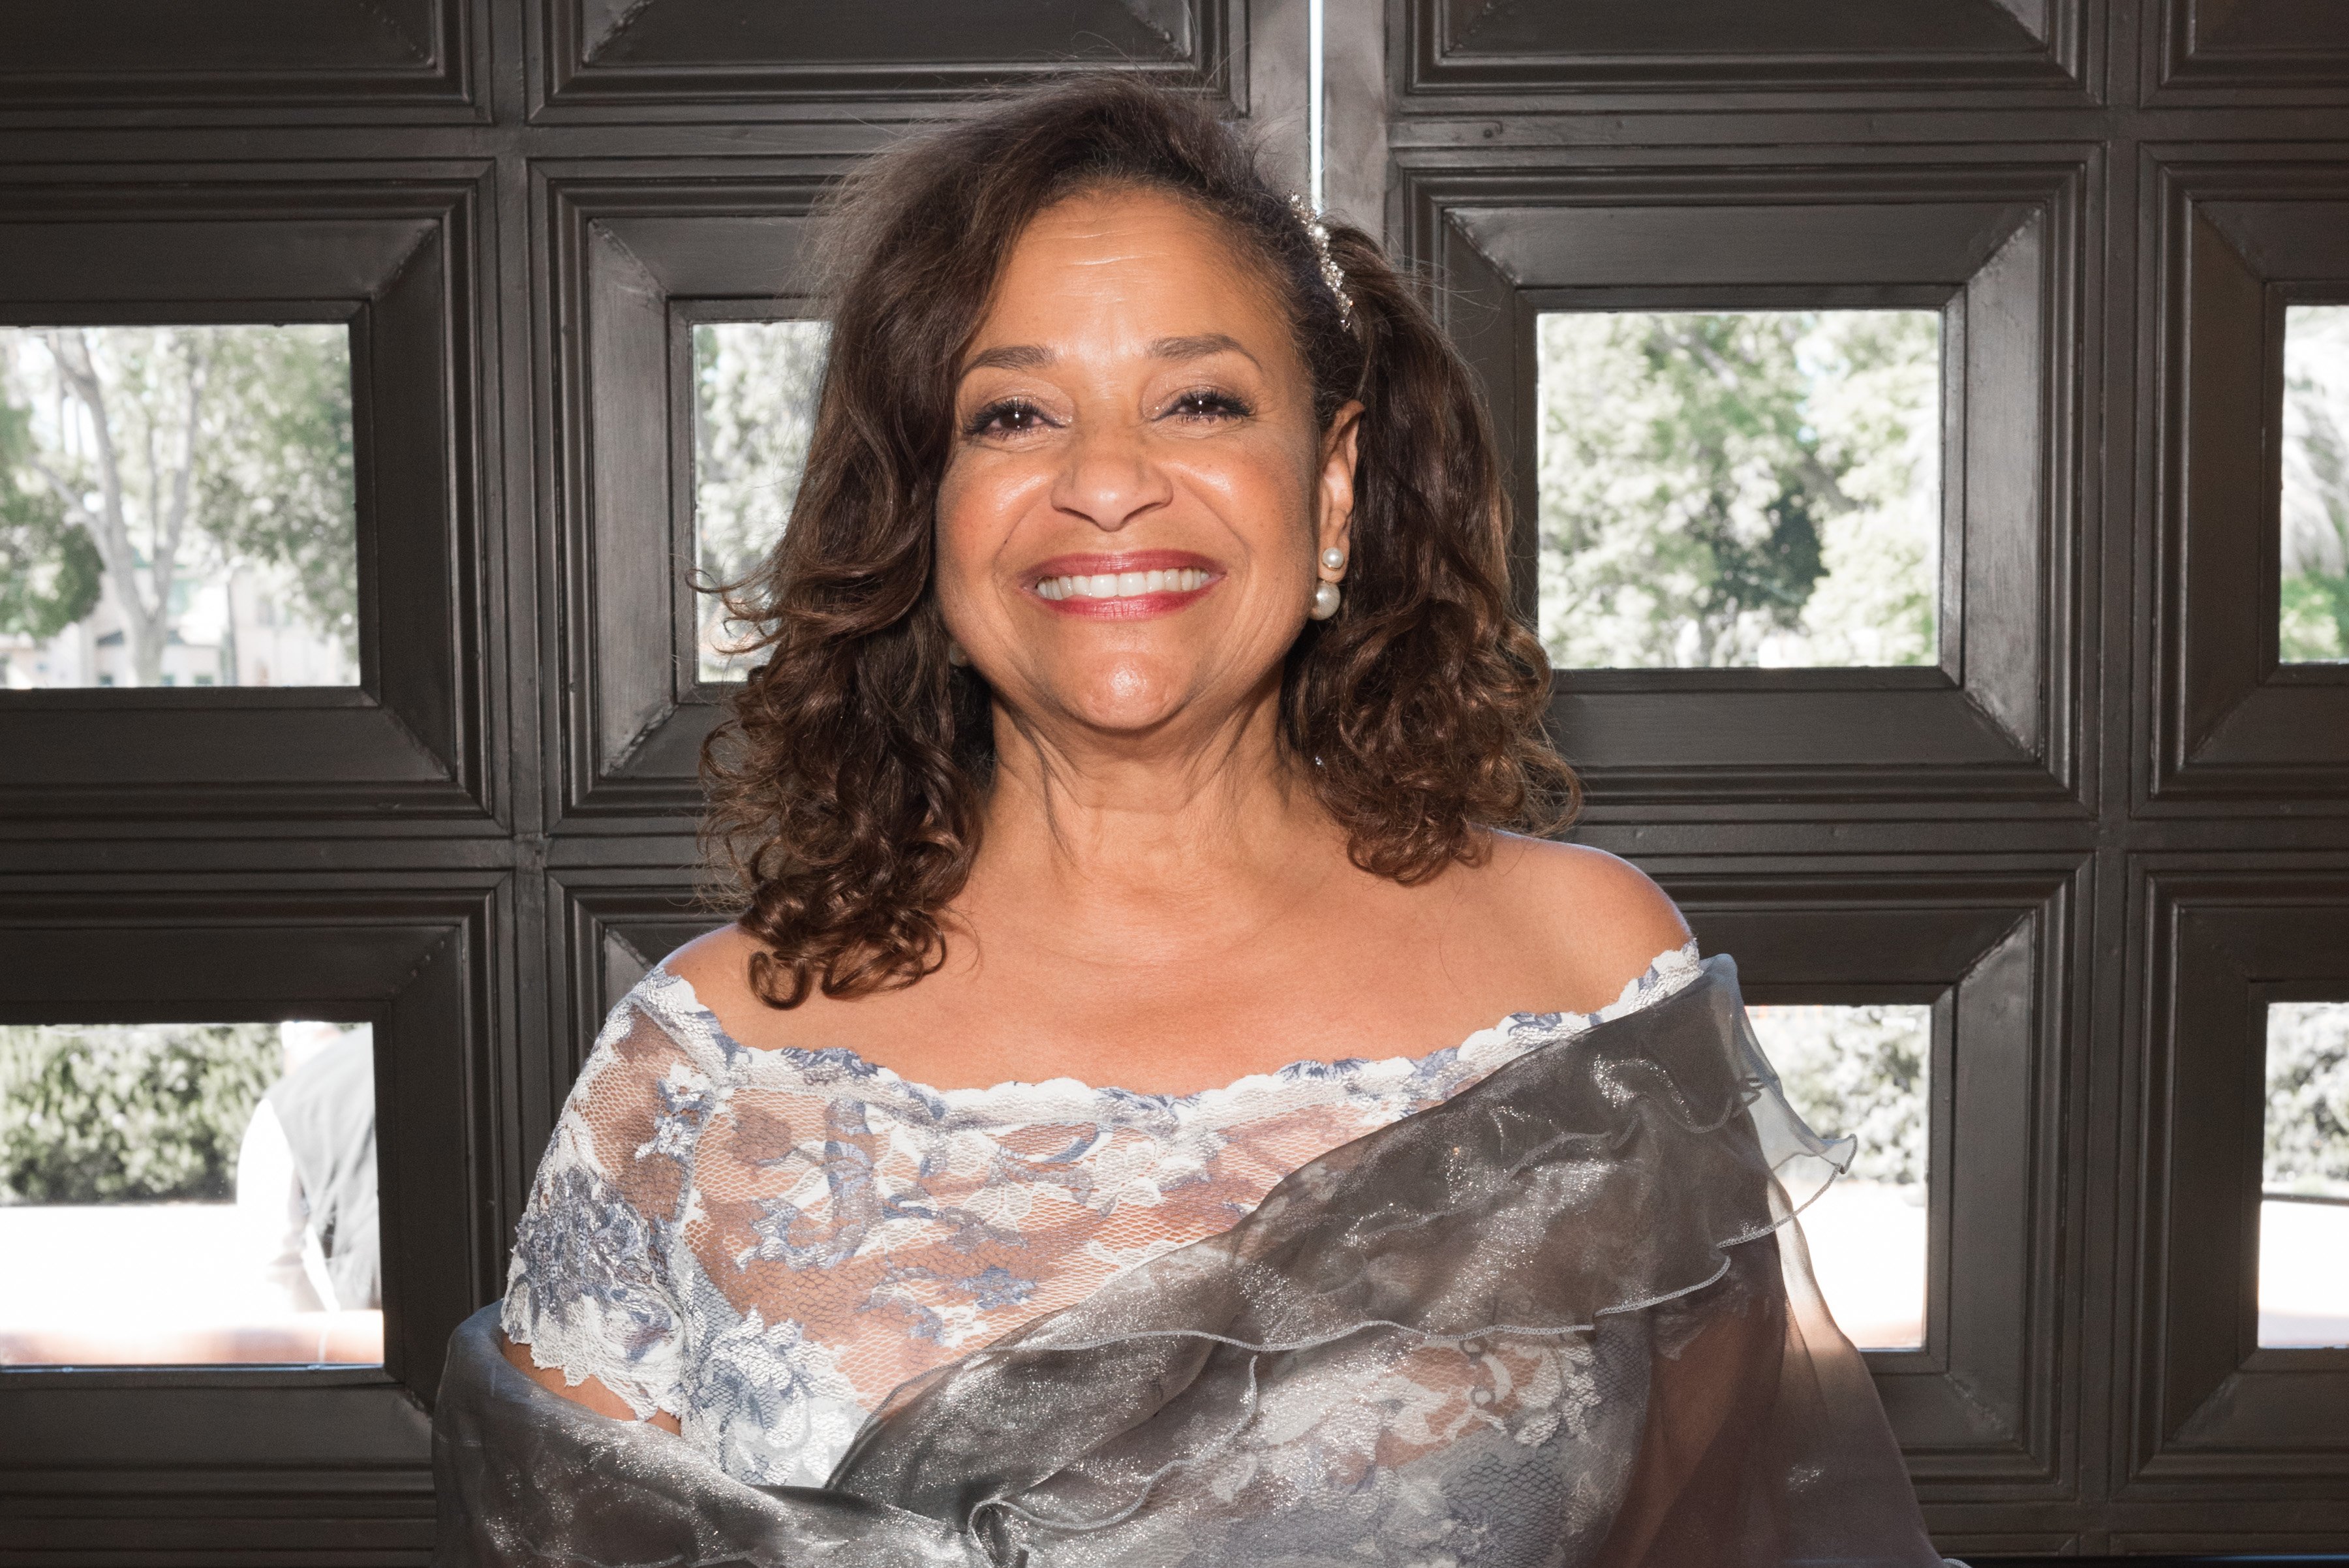 Debbie Allen at the "Turn Me Loose" - Red Carpet event at Wallis Annenberg Center for the Performing Arts on October 15, 2017 in Beverly Hills, California. | Source: Getty Images